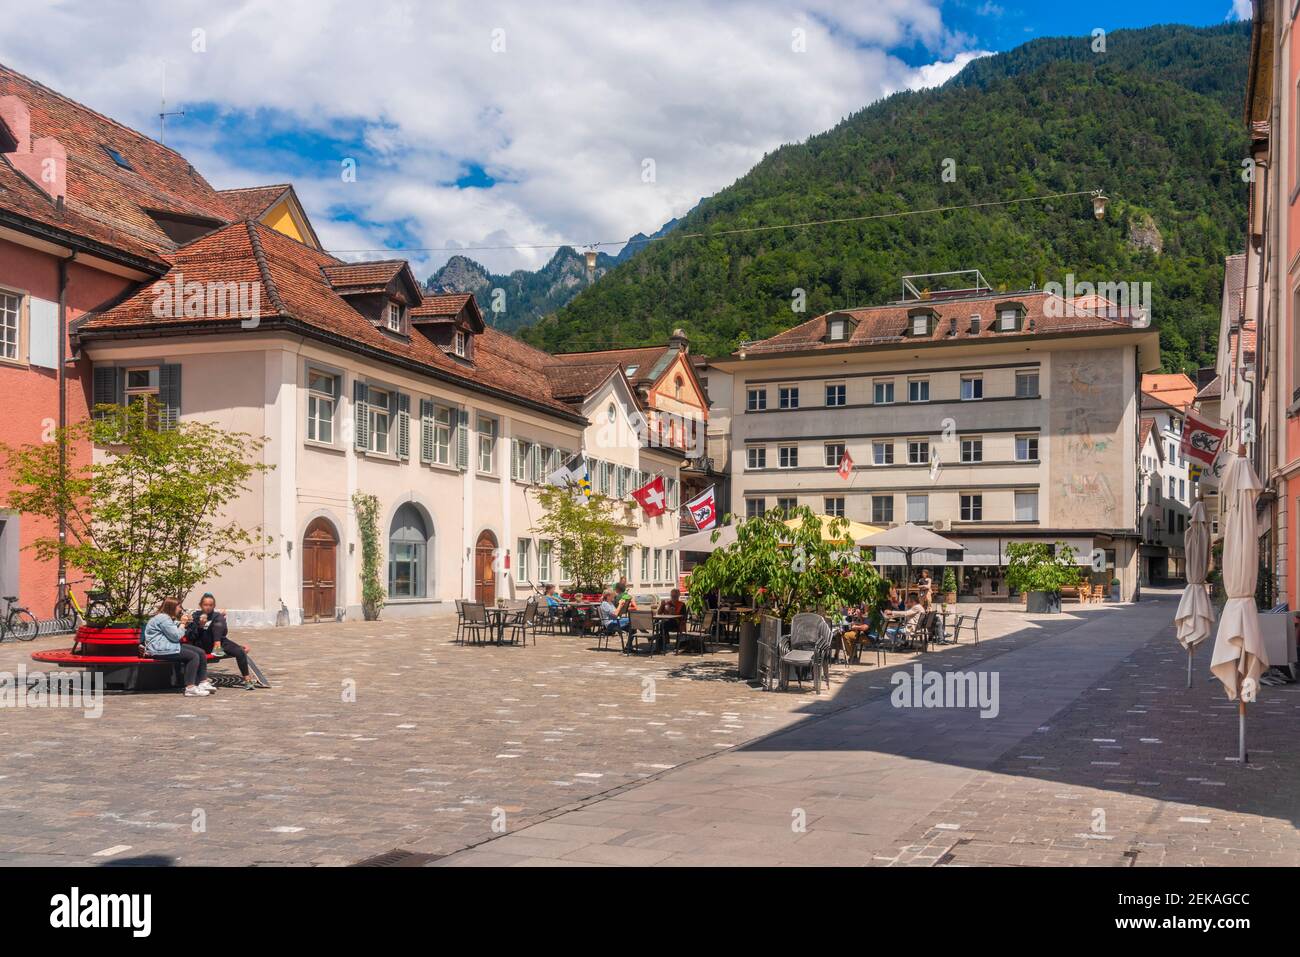 Kornplatz square with sidewalk restaurants and cafes in old town of Chur, Switzerland Stock Photo